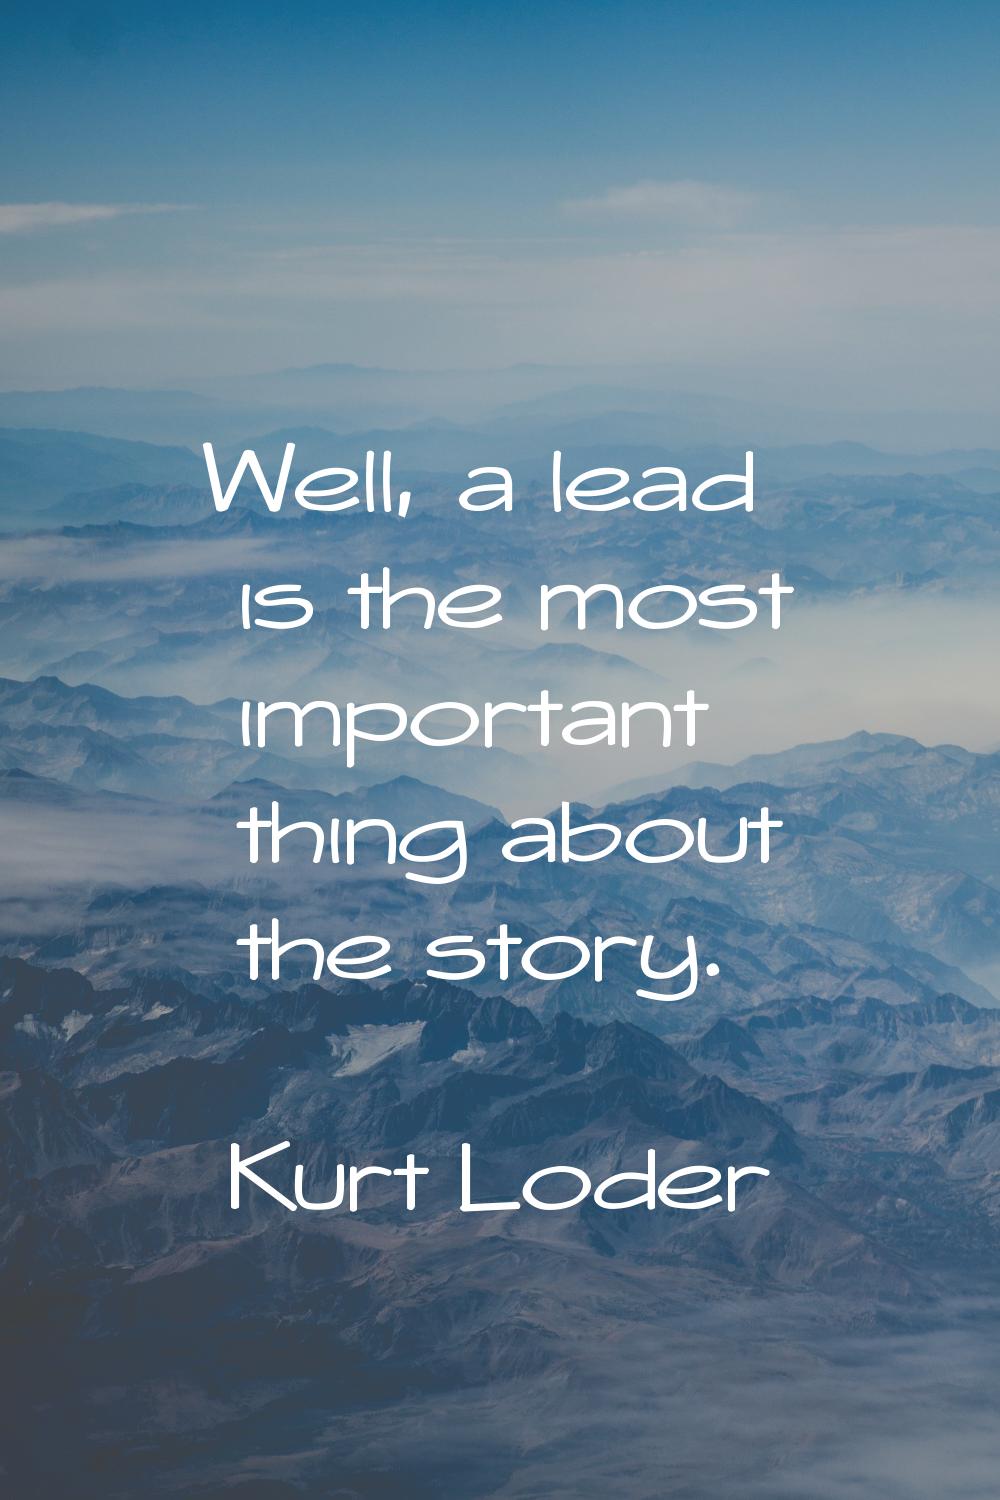 Well, a lead is the most important thing about the story.